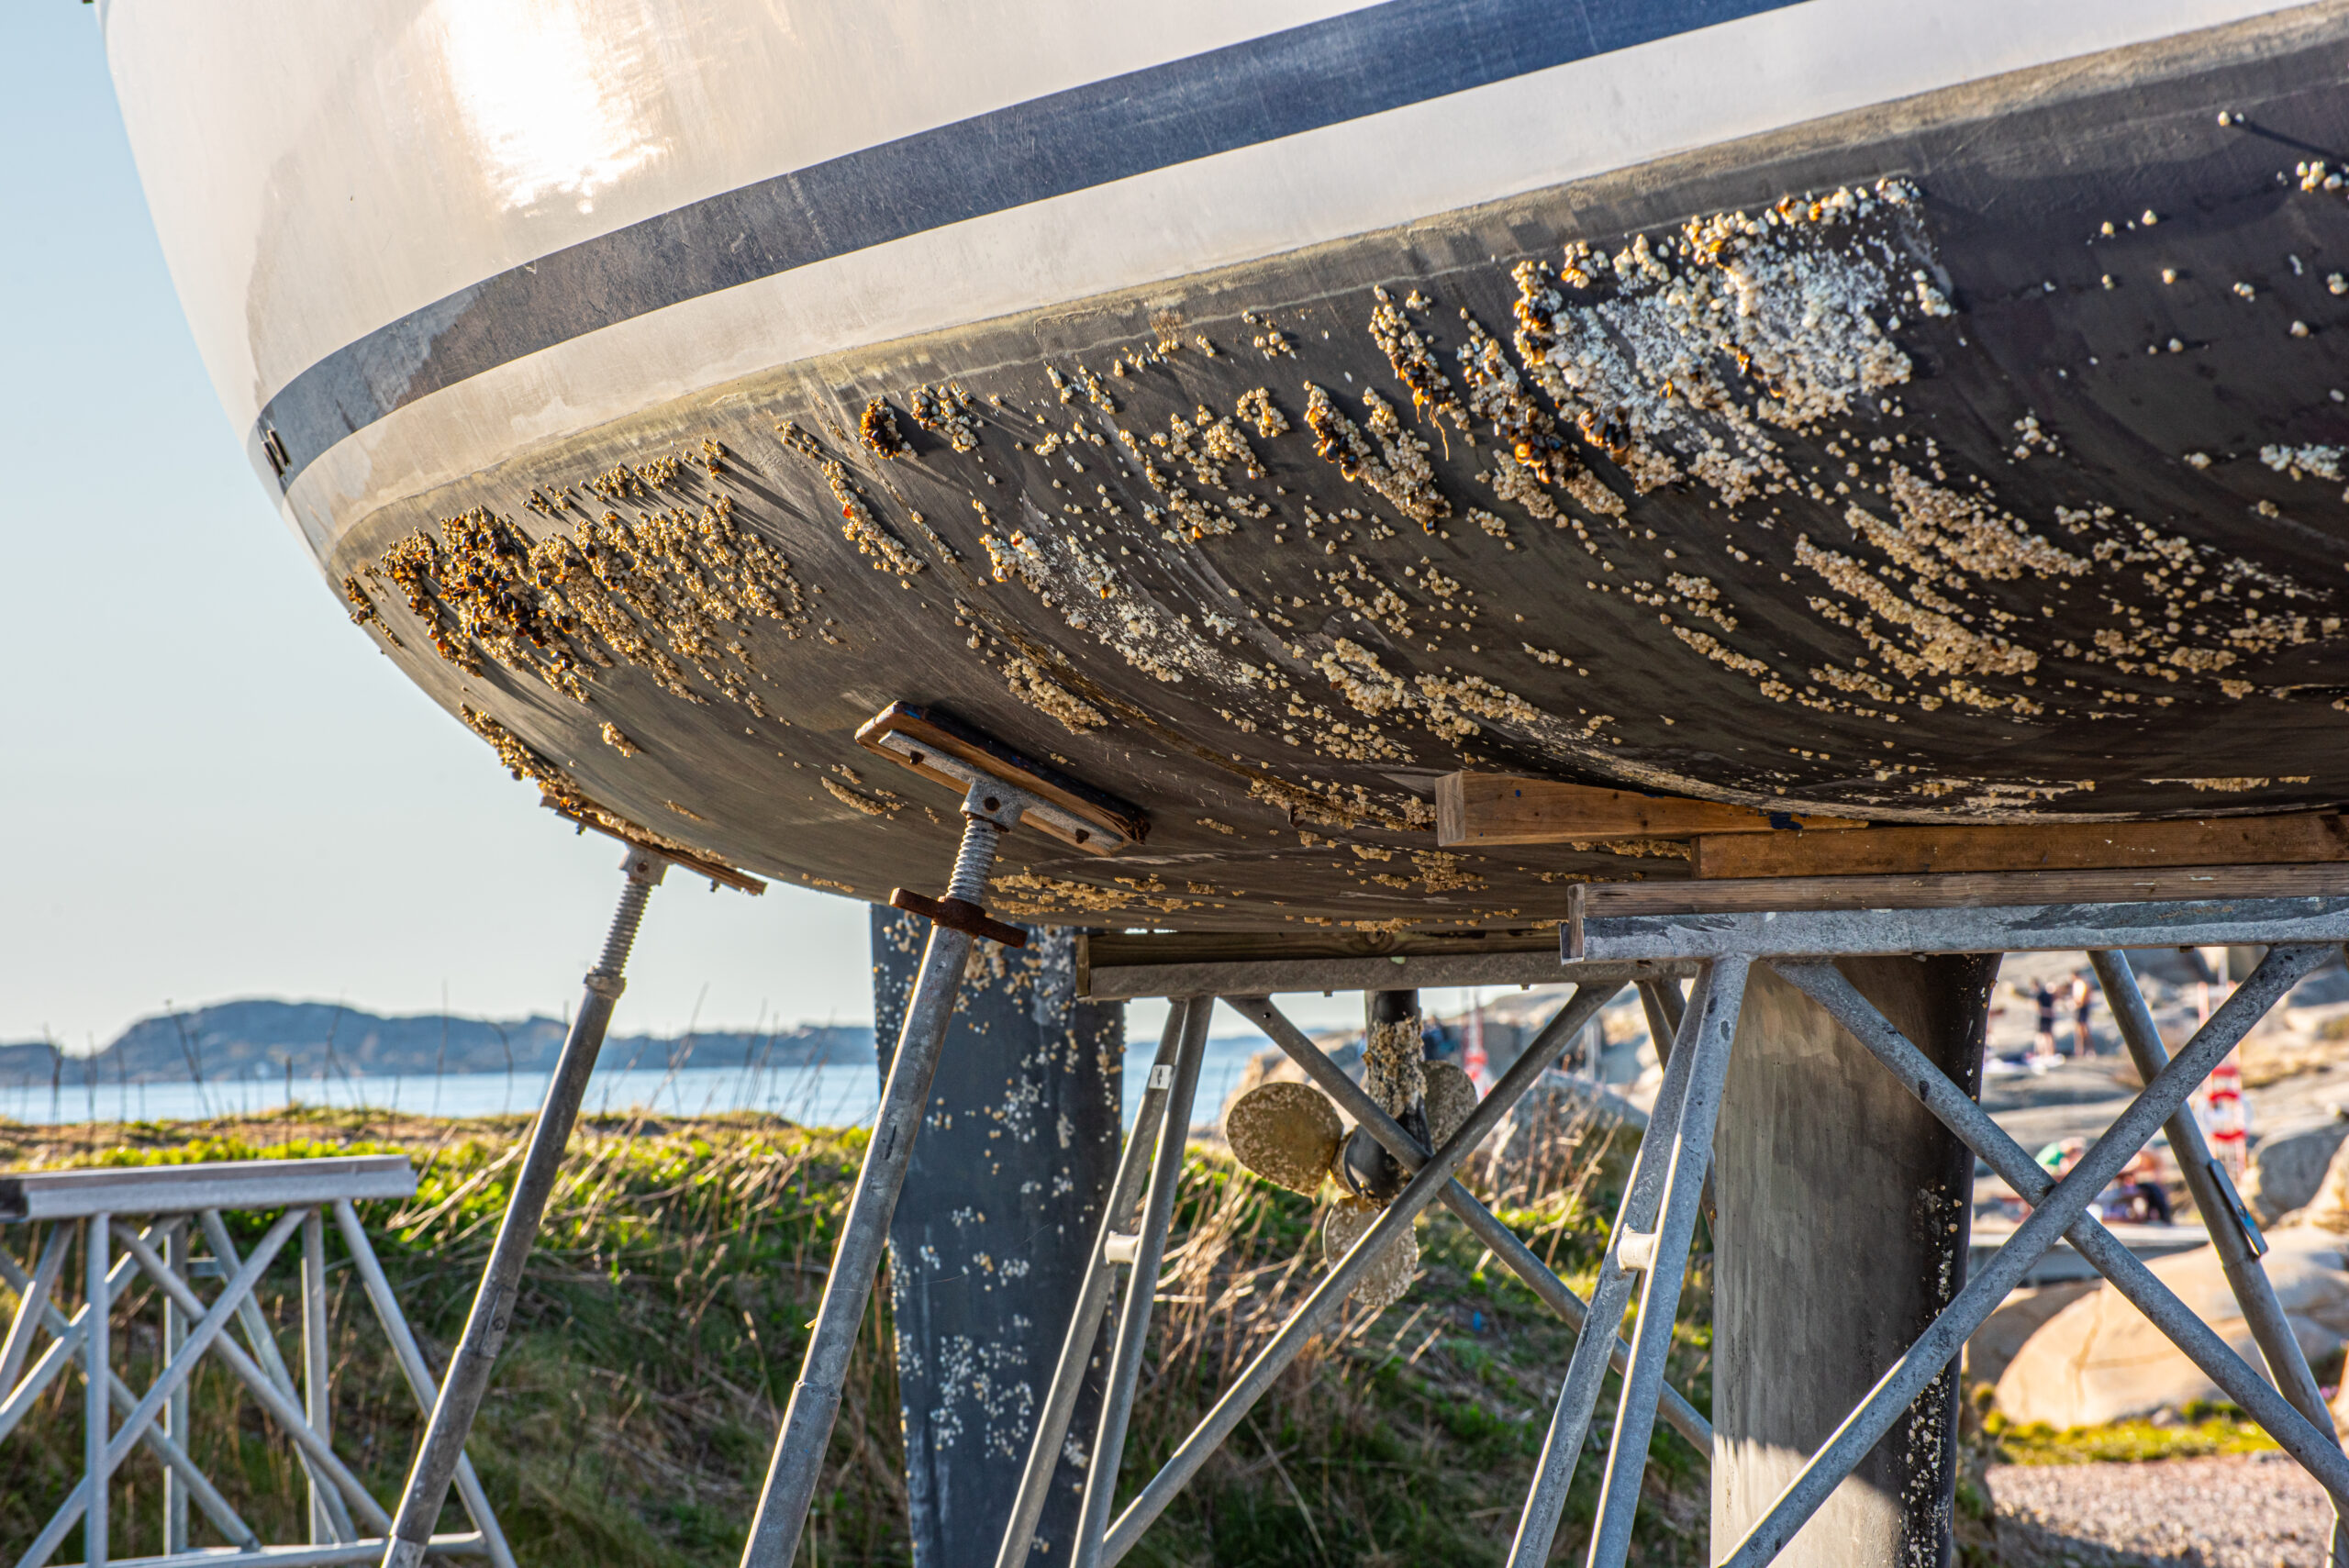 Barnacle growth on the hull of a sailboat. Ready to be scraped, cleaned and coated with antifouling paint..